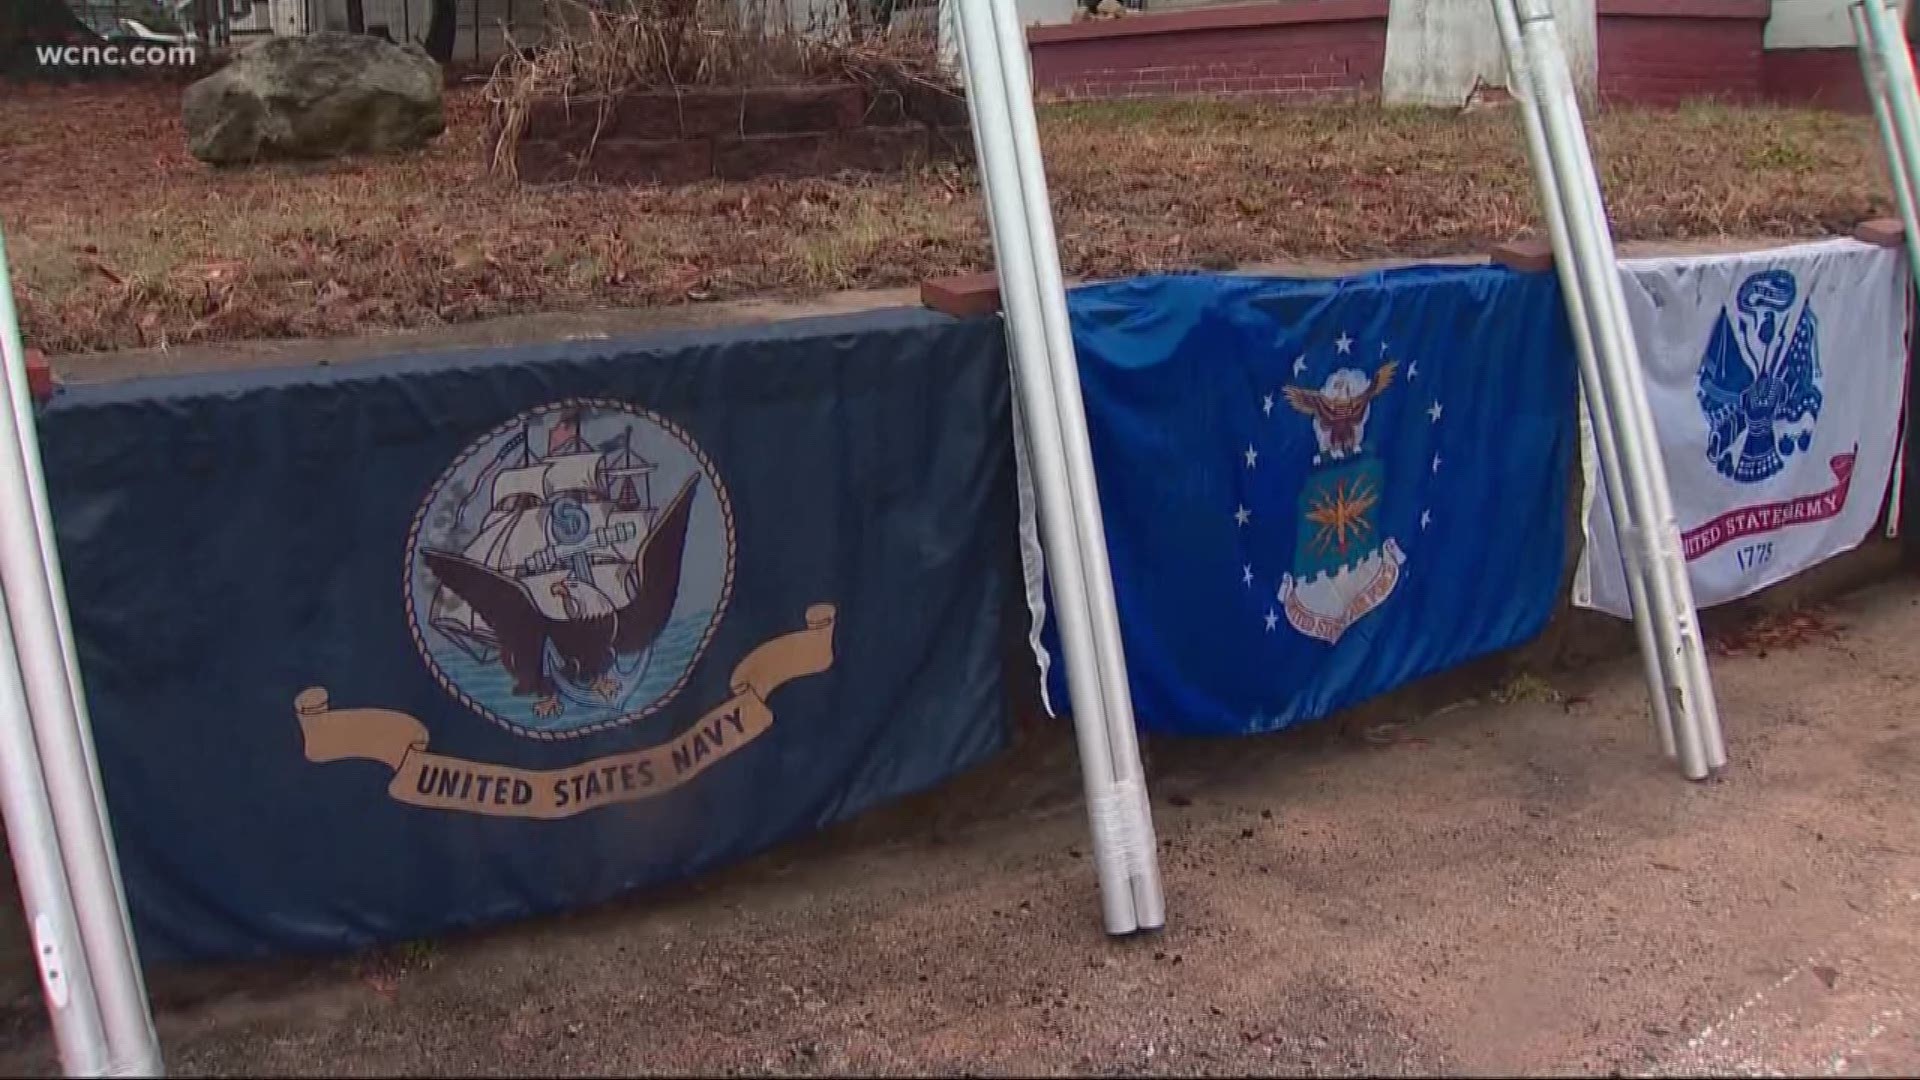 A veteran in Gastonia is missing his Marine Corps flag after he said someone stole it off the pole in his front yard.